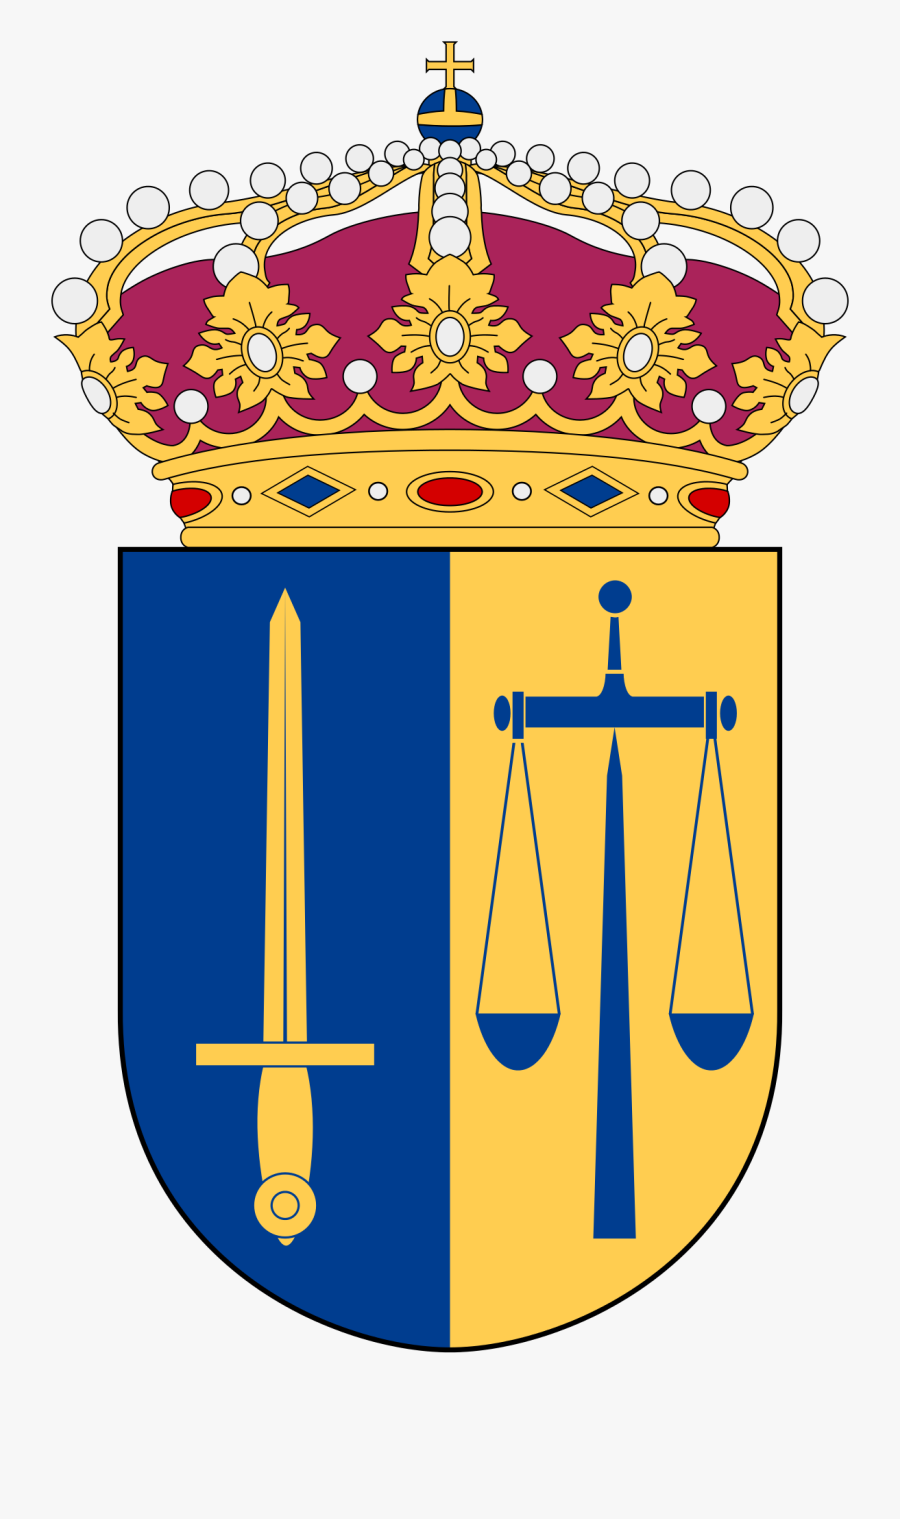 Scales Of Justice In Heraldry - National Defence Radio Establishment, Transparent Clipart